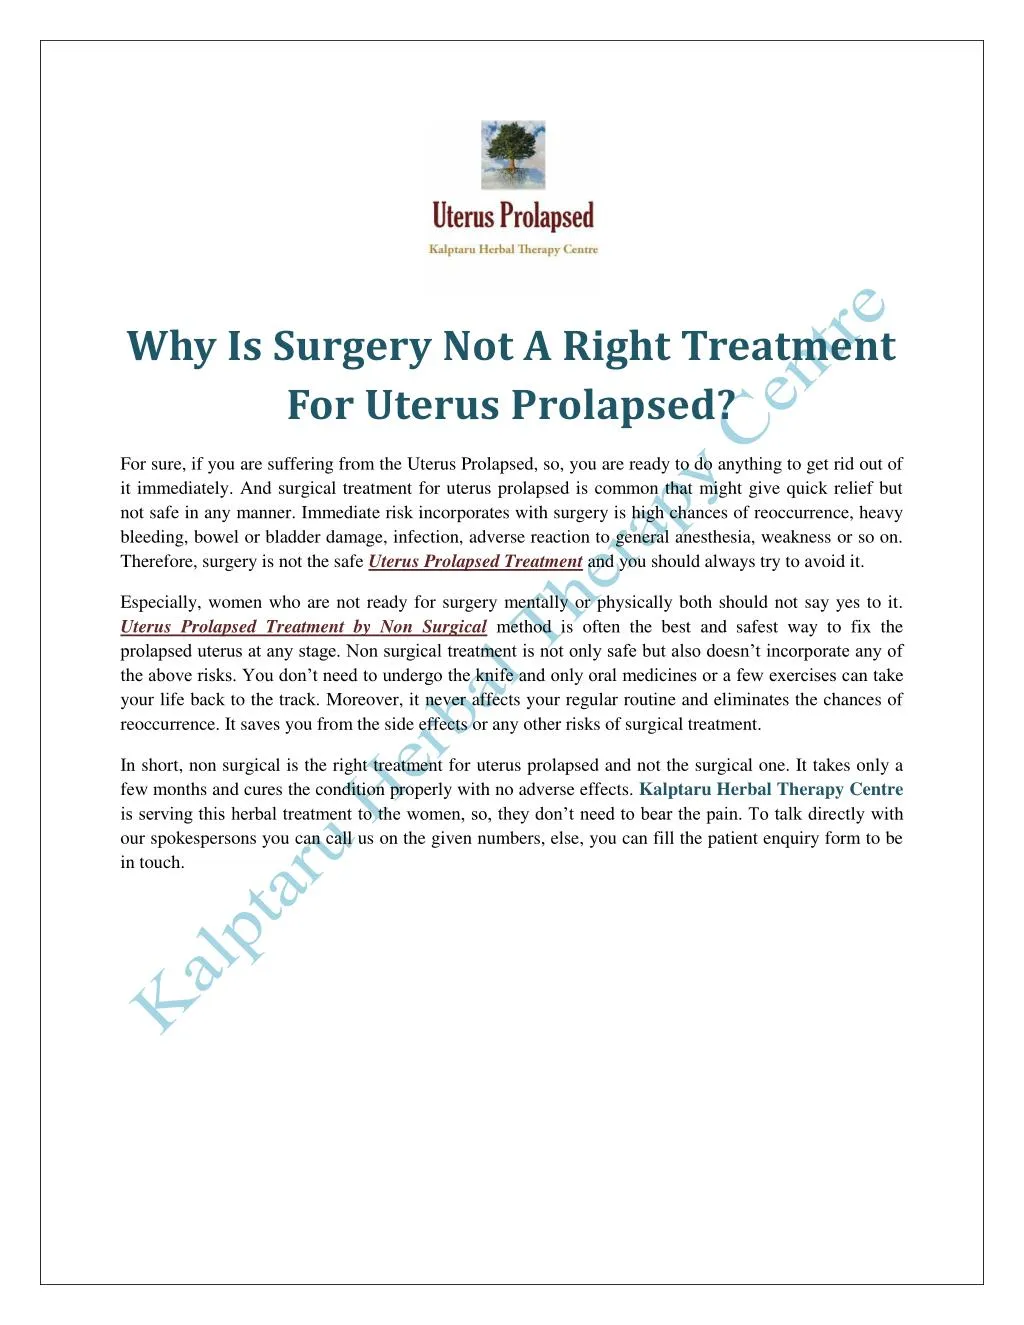 why is surgery not a right treatment for uterus